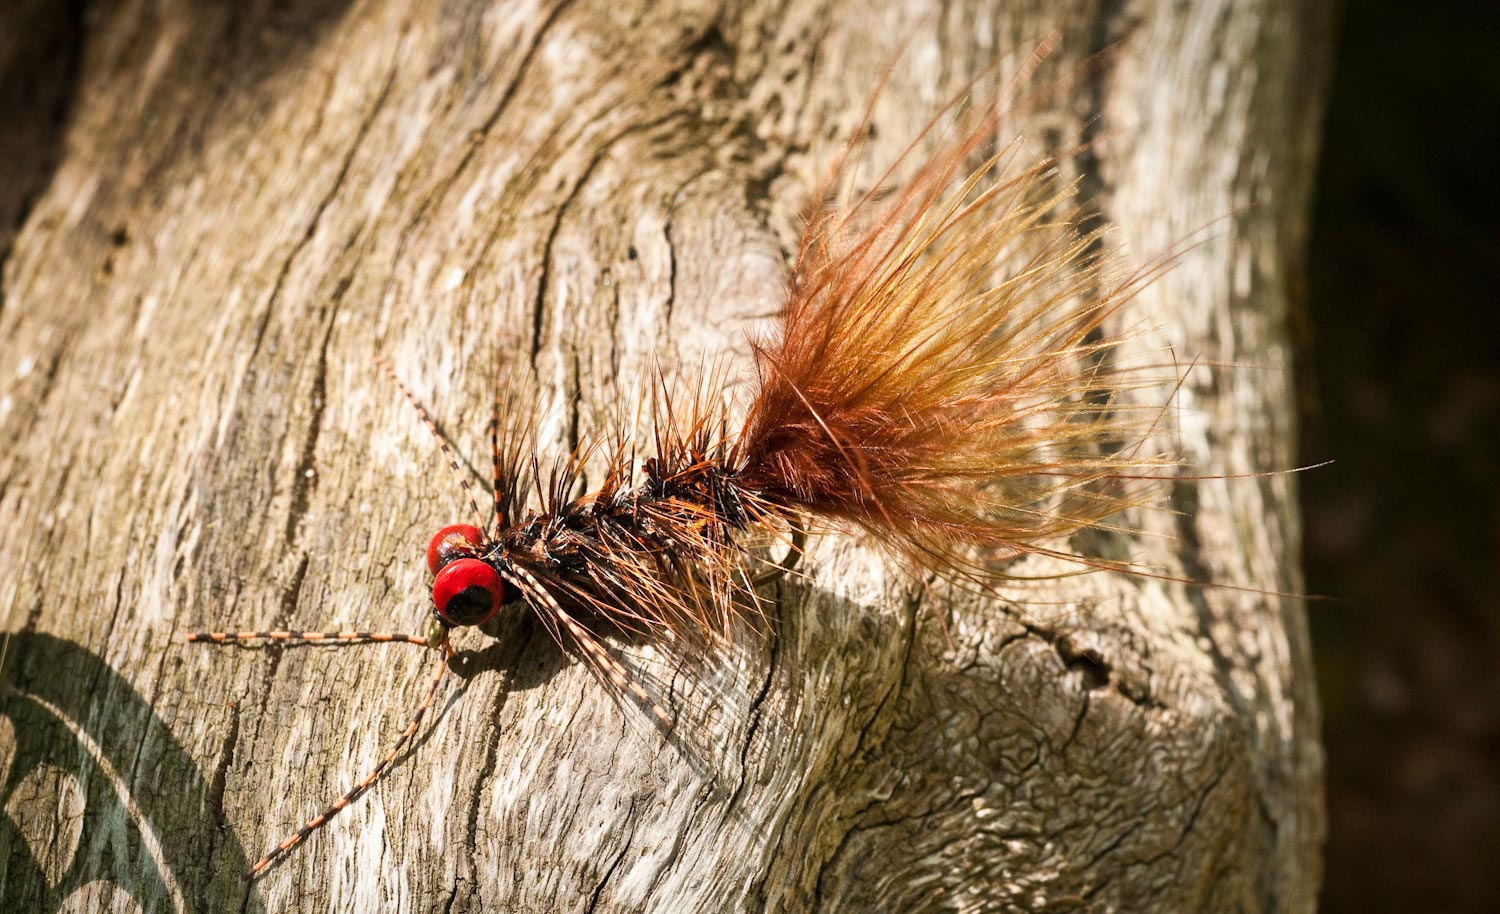 Fly Fishing: The Woolly Bugger Isn't all that, Or is it? - Fly Fishing, Gink and Gasoline, How to Fly Fish, Trout Fishing, Fly Tying